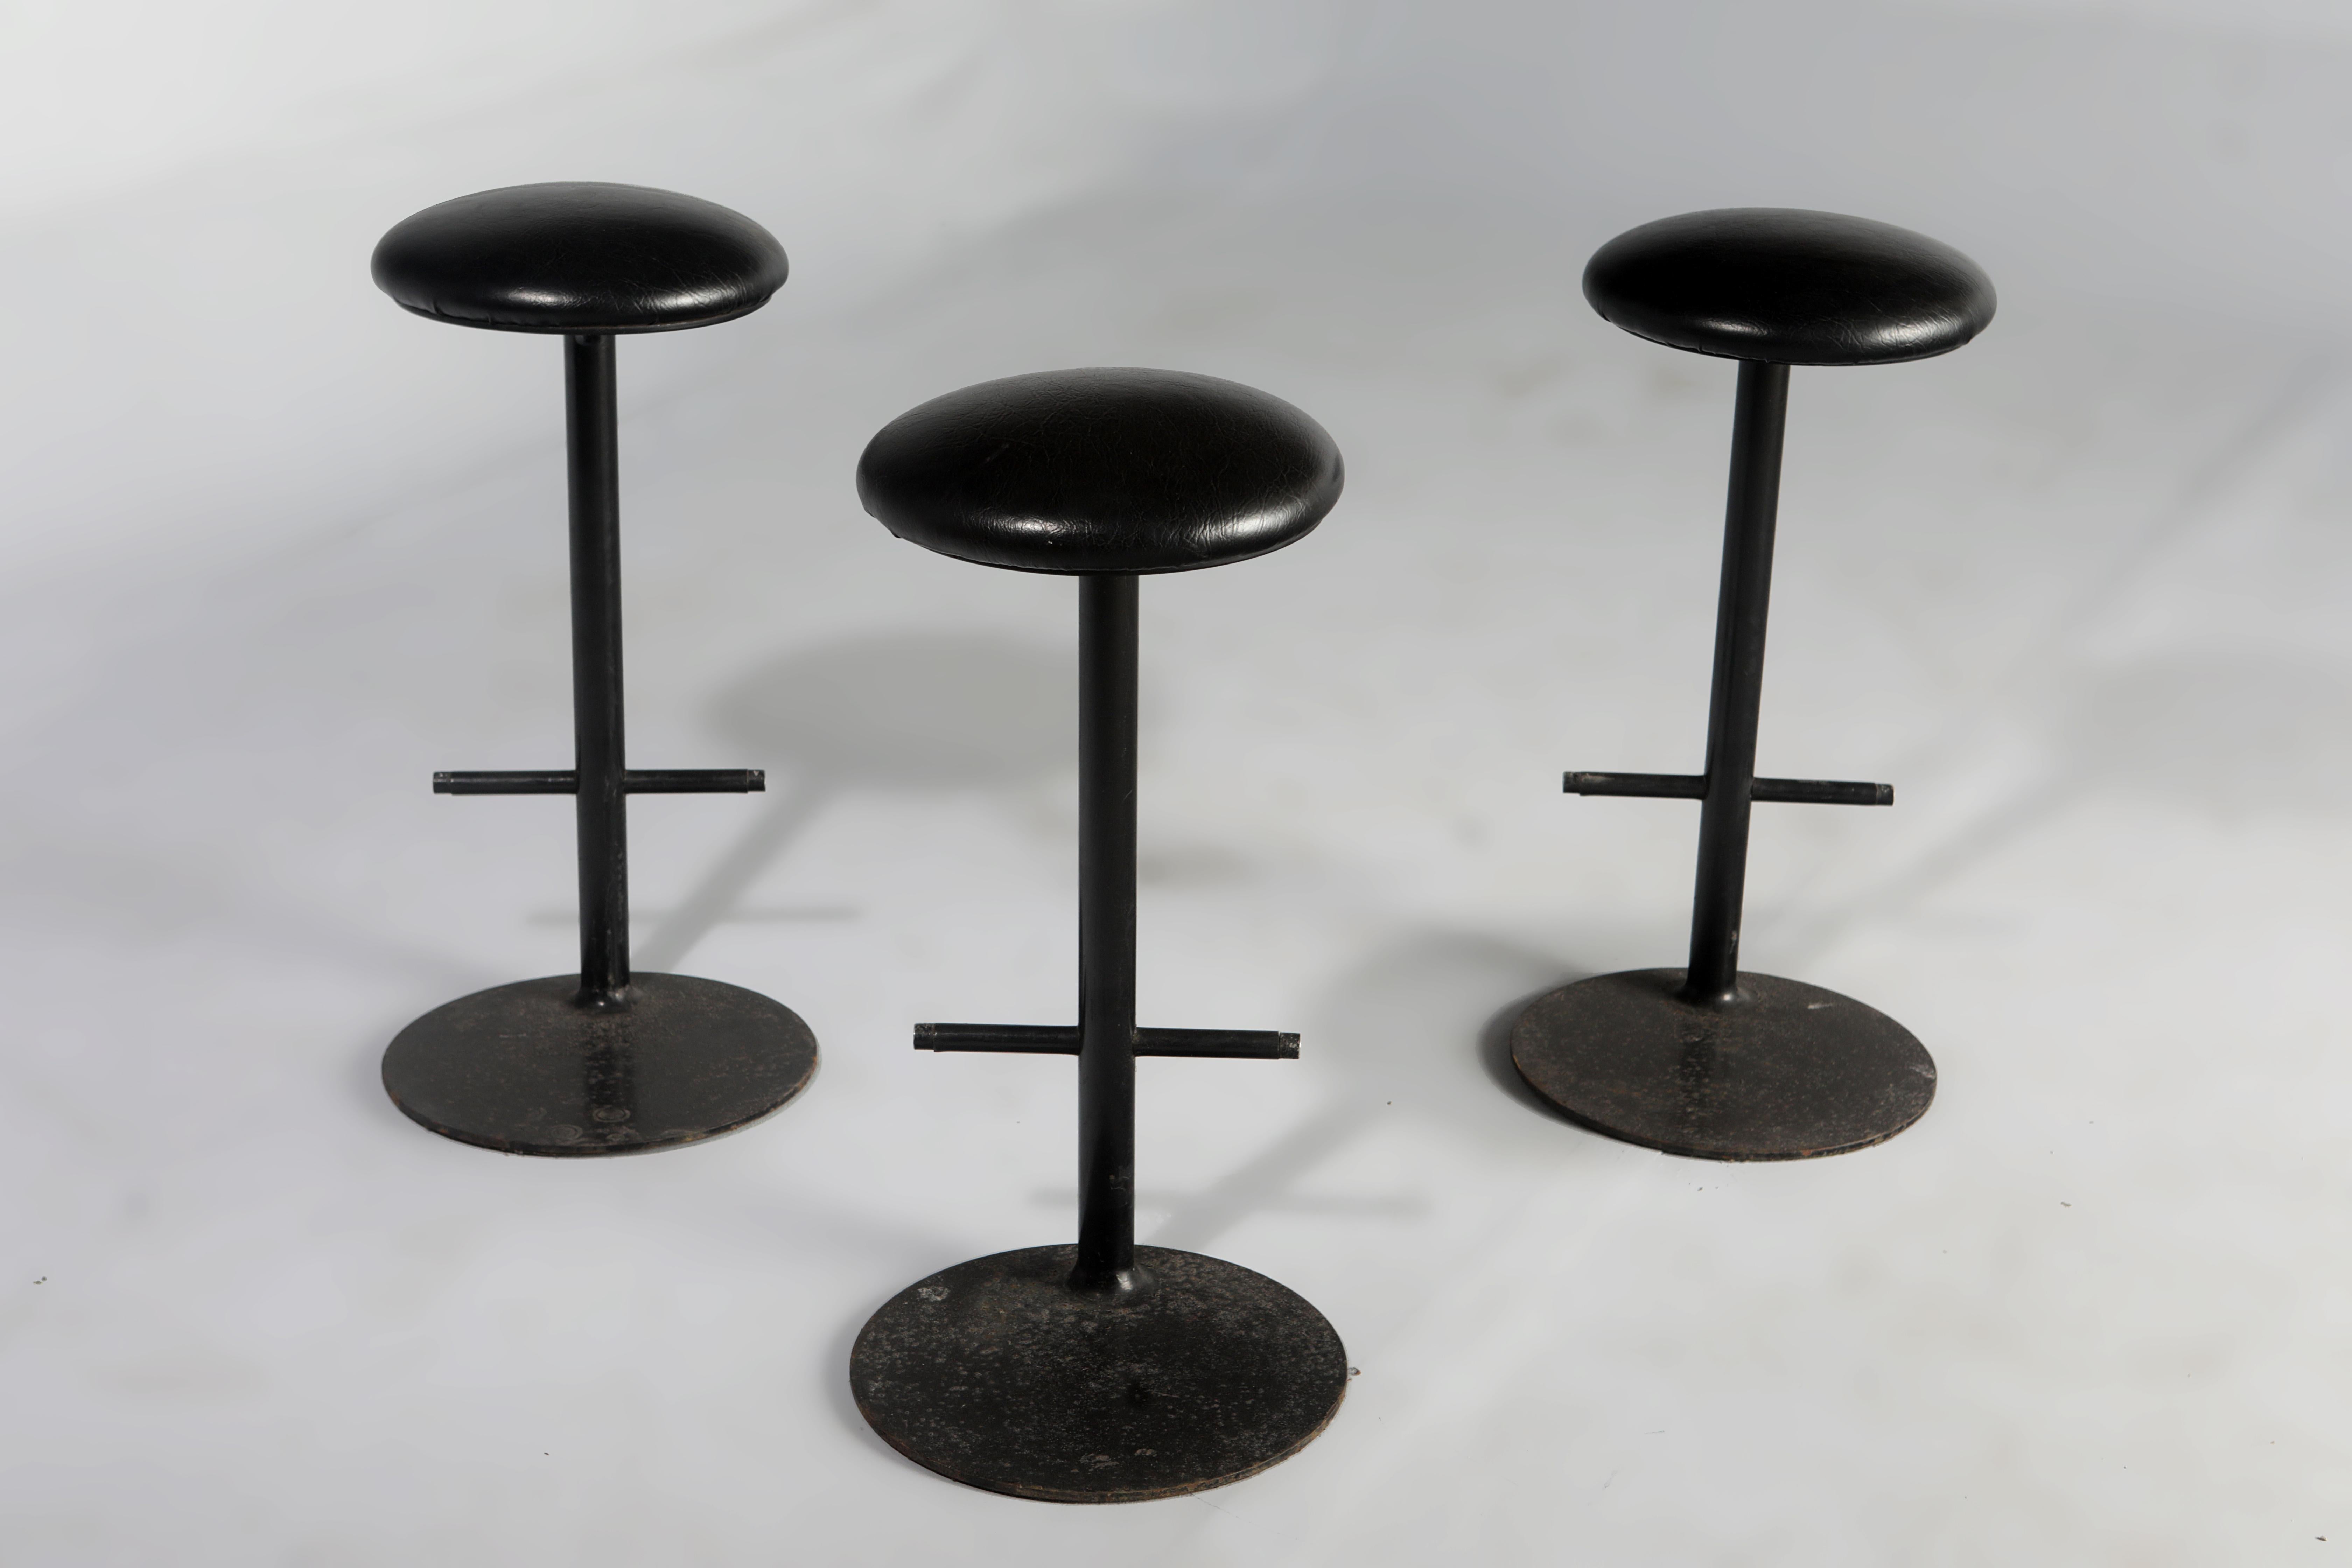 Set of three tall Ciranda stools by Ricardo Fasanello, 1986.

The Ciranda Stool designed by Ricardo Fasanello in 1986 is a beautiful example of functional art. Made from durable carbon steel, the stool features a solid round base that provides